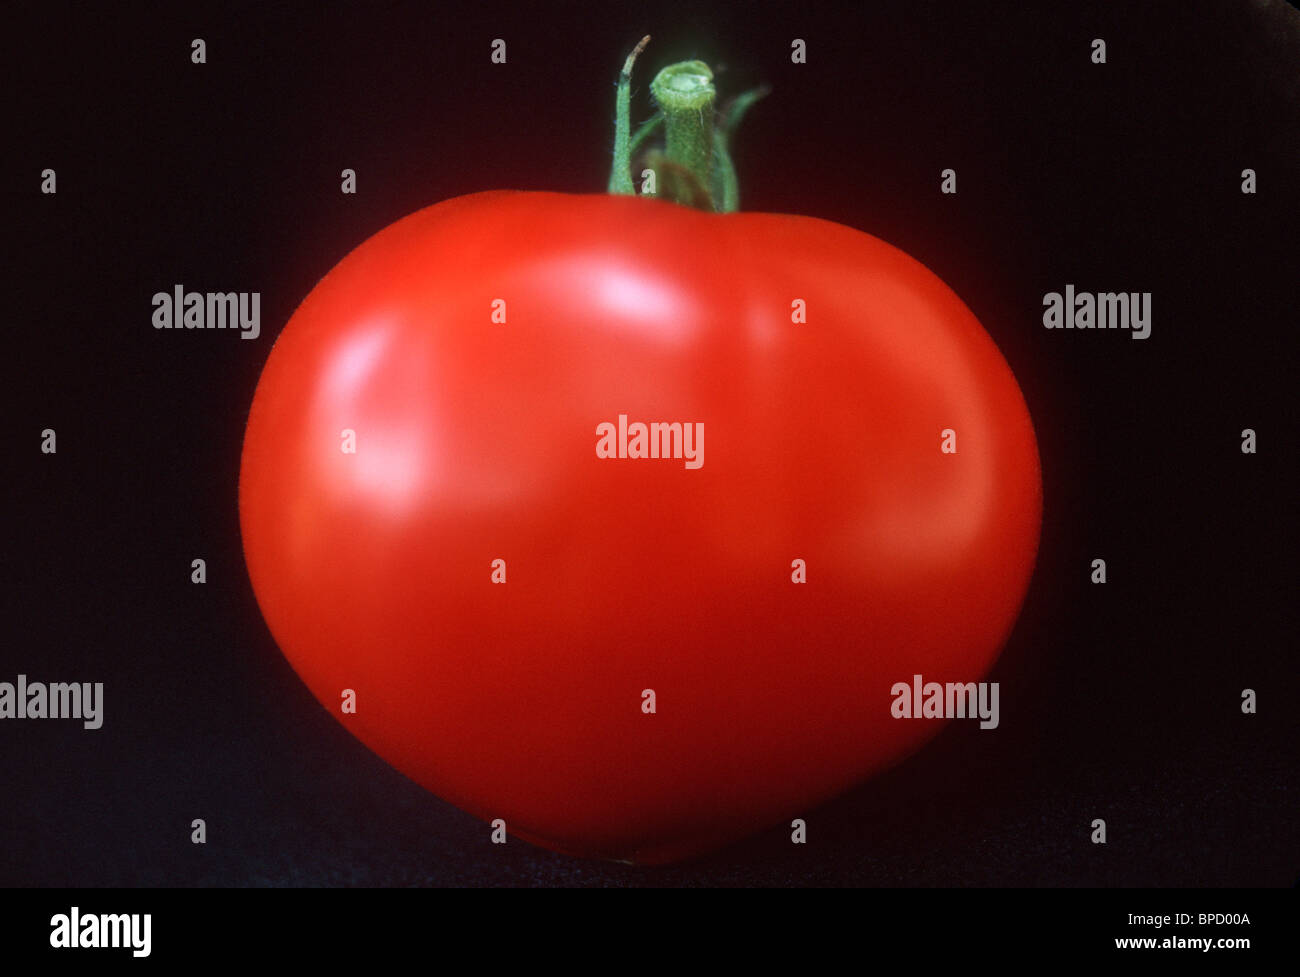 Tomato, red, lucious, fresh, just picked, ready to eat, cutout, cut out, on black background, freshness Stock Photo